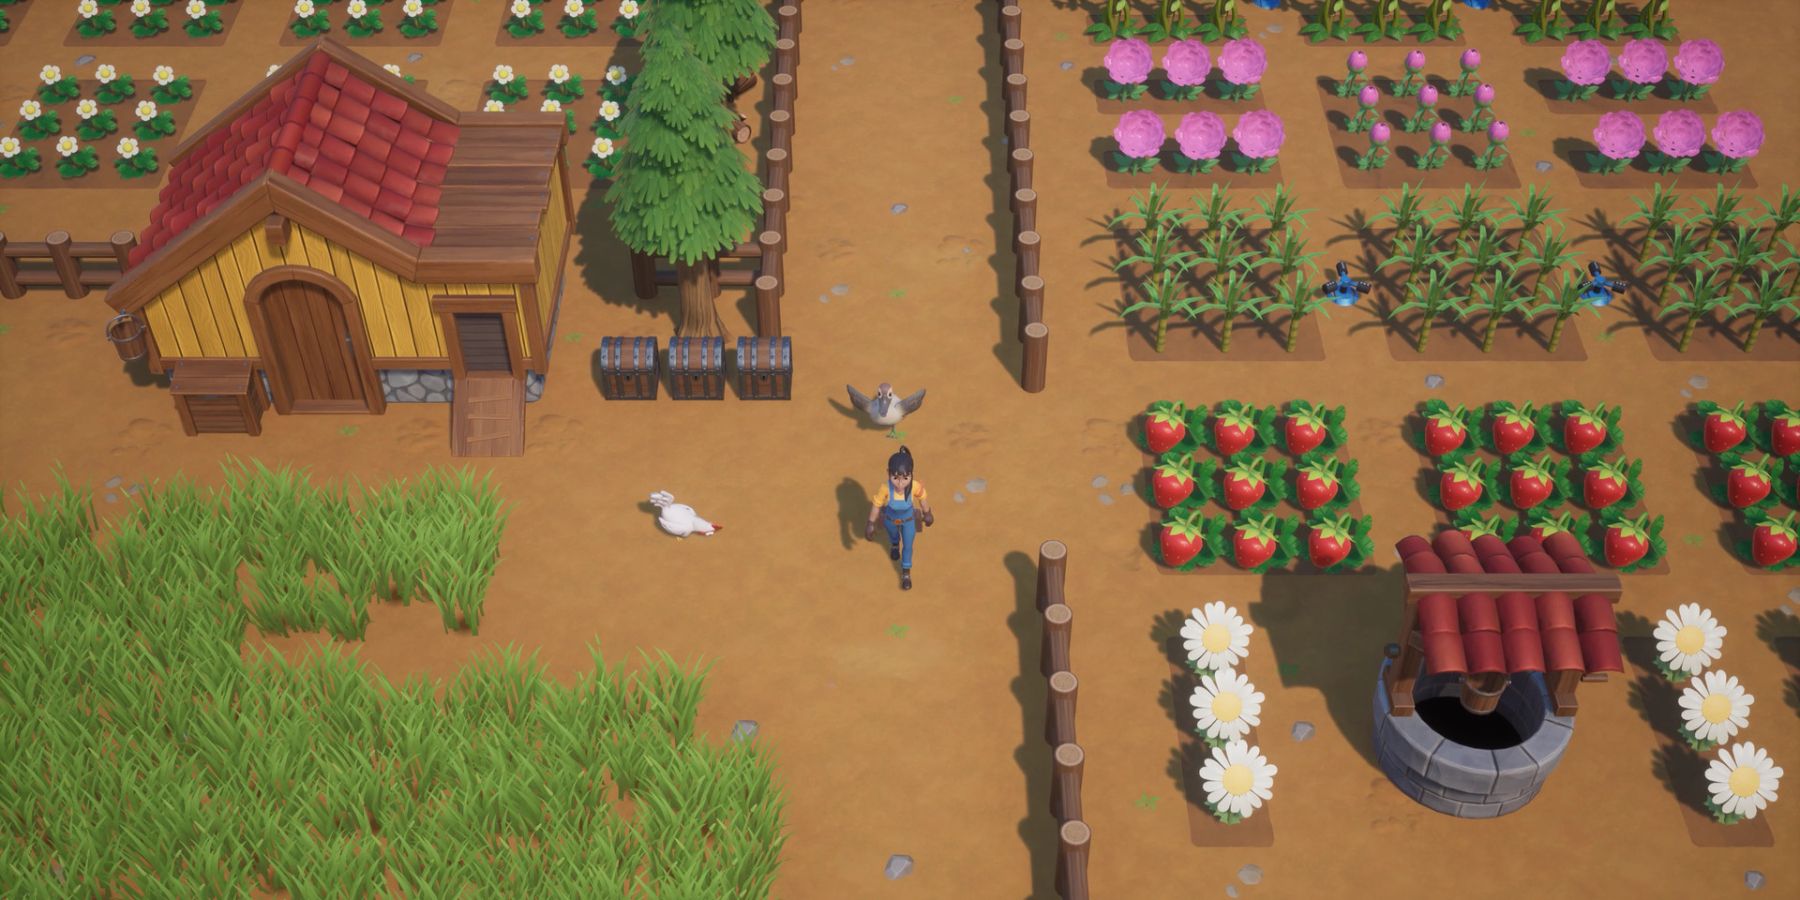 Walking through the farm in Coral Island while showcasing some of the crops